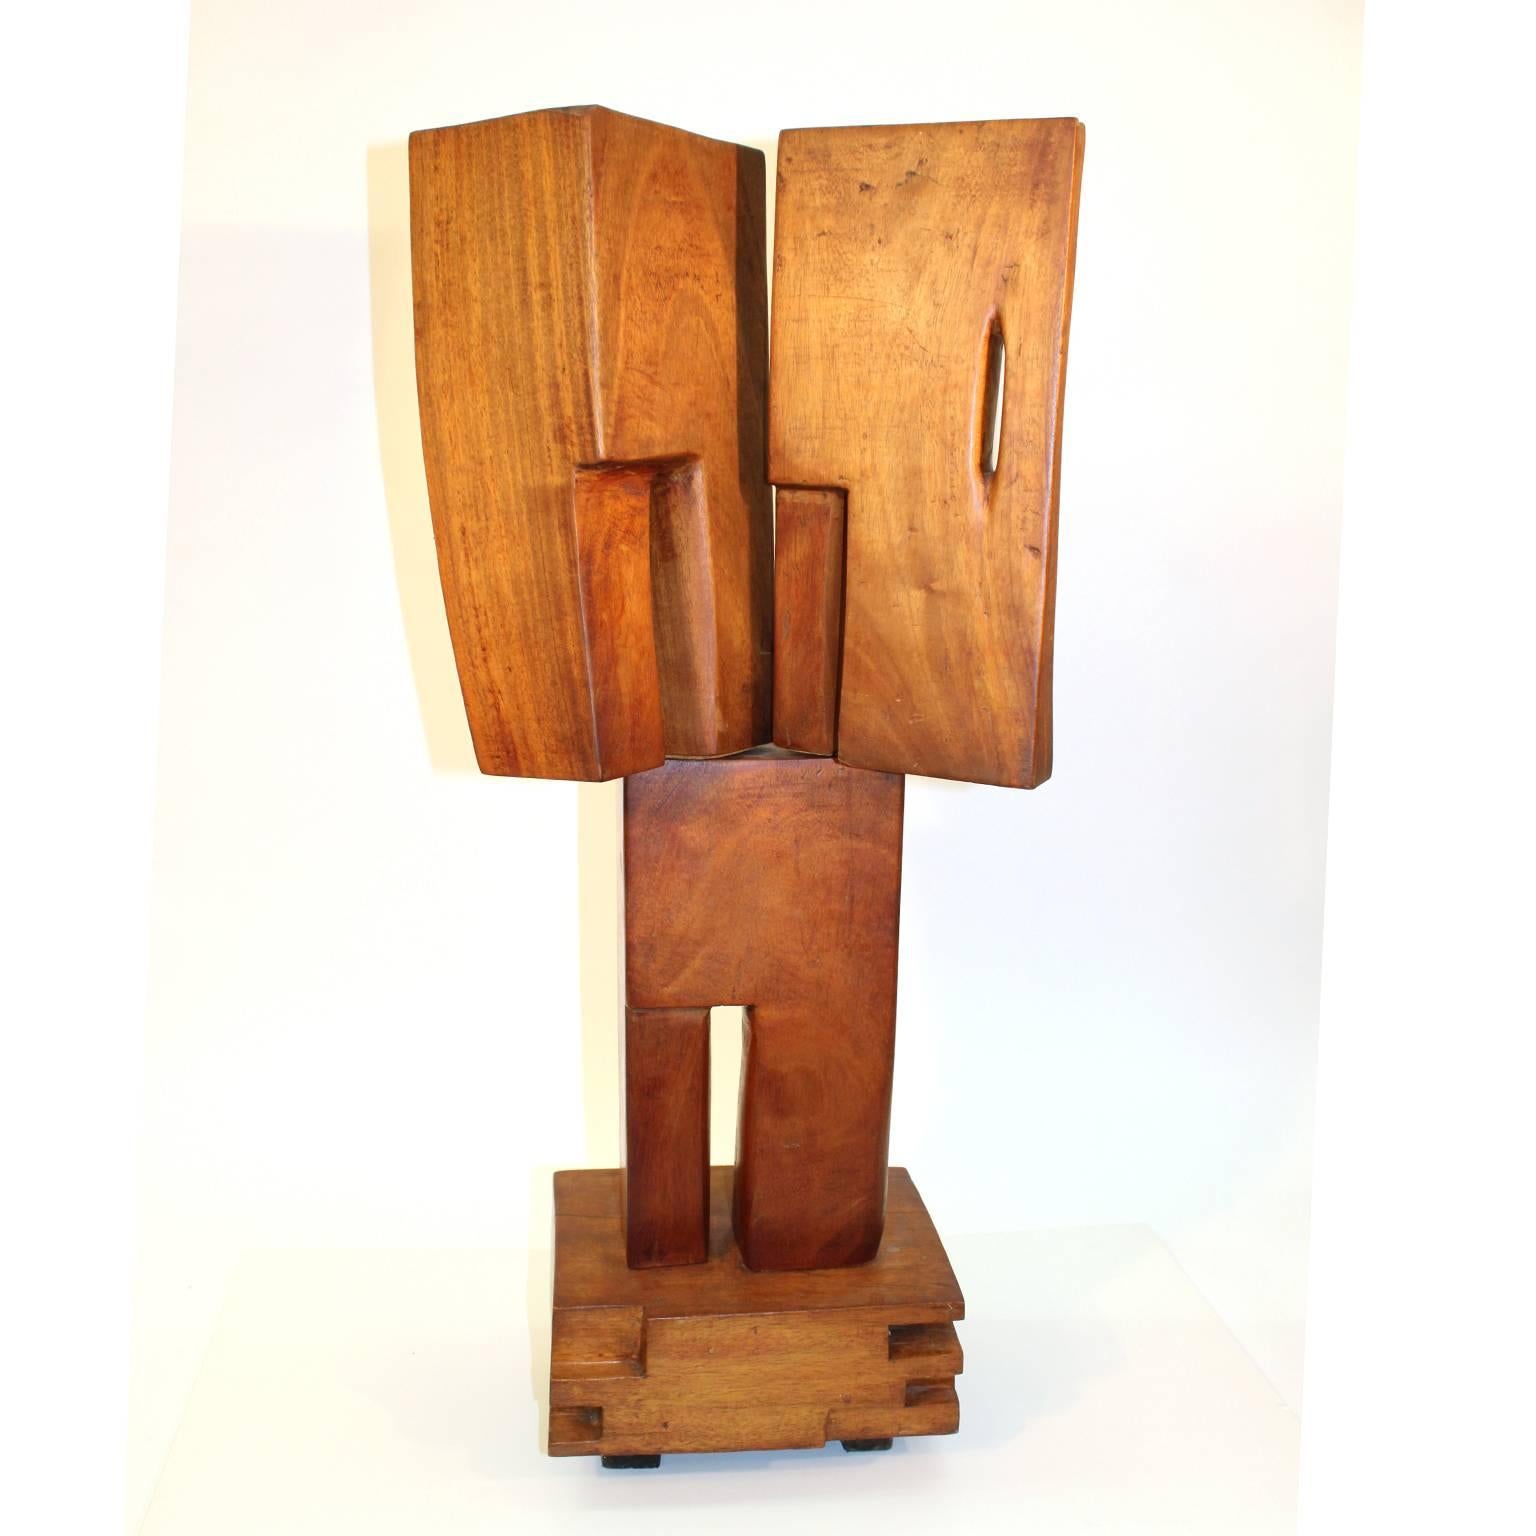 An abstract constructivist spiritual carved wood sculpture titled 'The Shrine', made by Polish-American female sculptor Bronka Stern (1909-2002) in the 1950s-1960s. Stern studied under Hugo Robus at Columbia University and was influenced by Moore